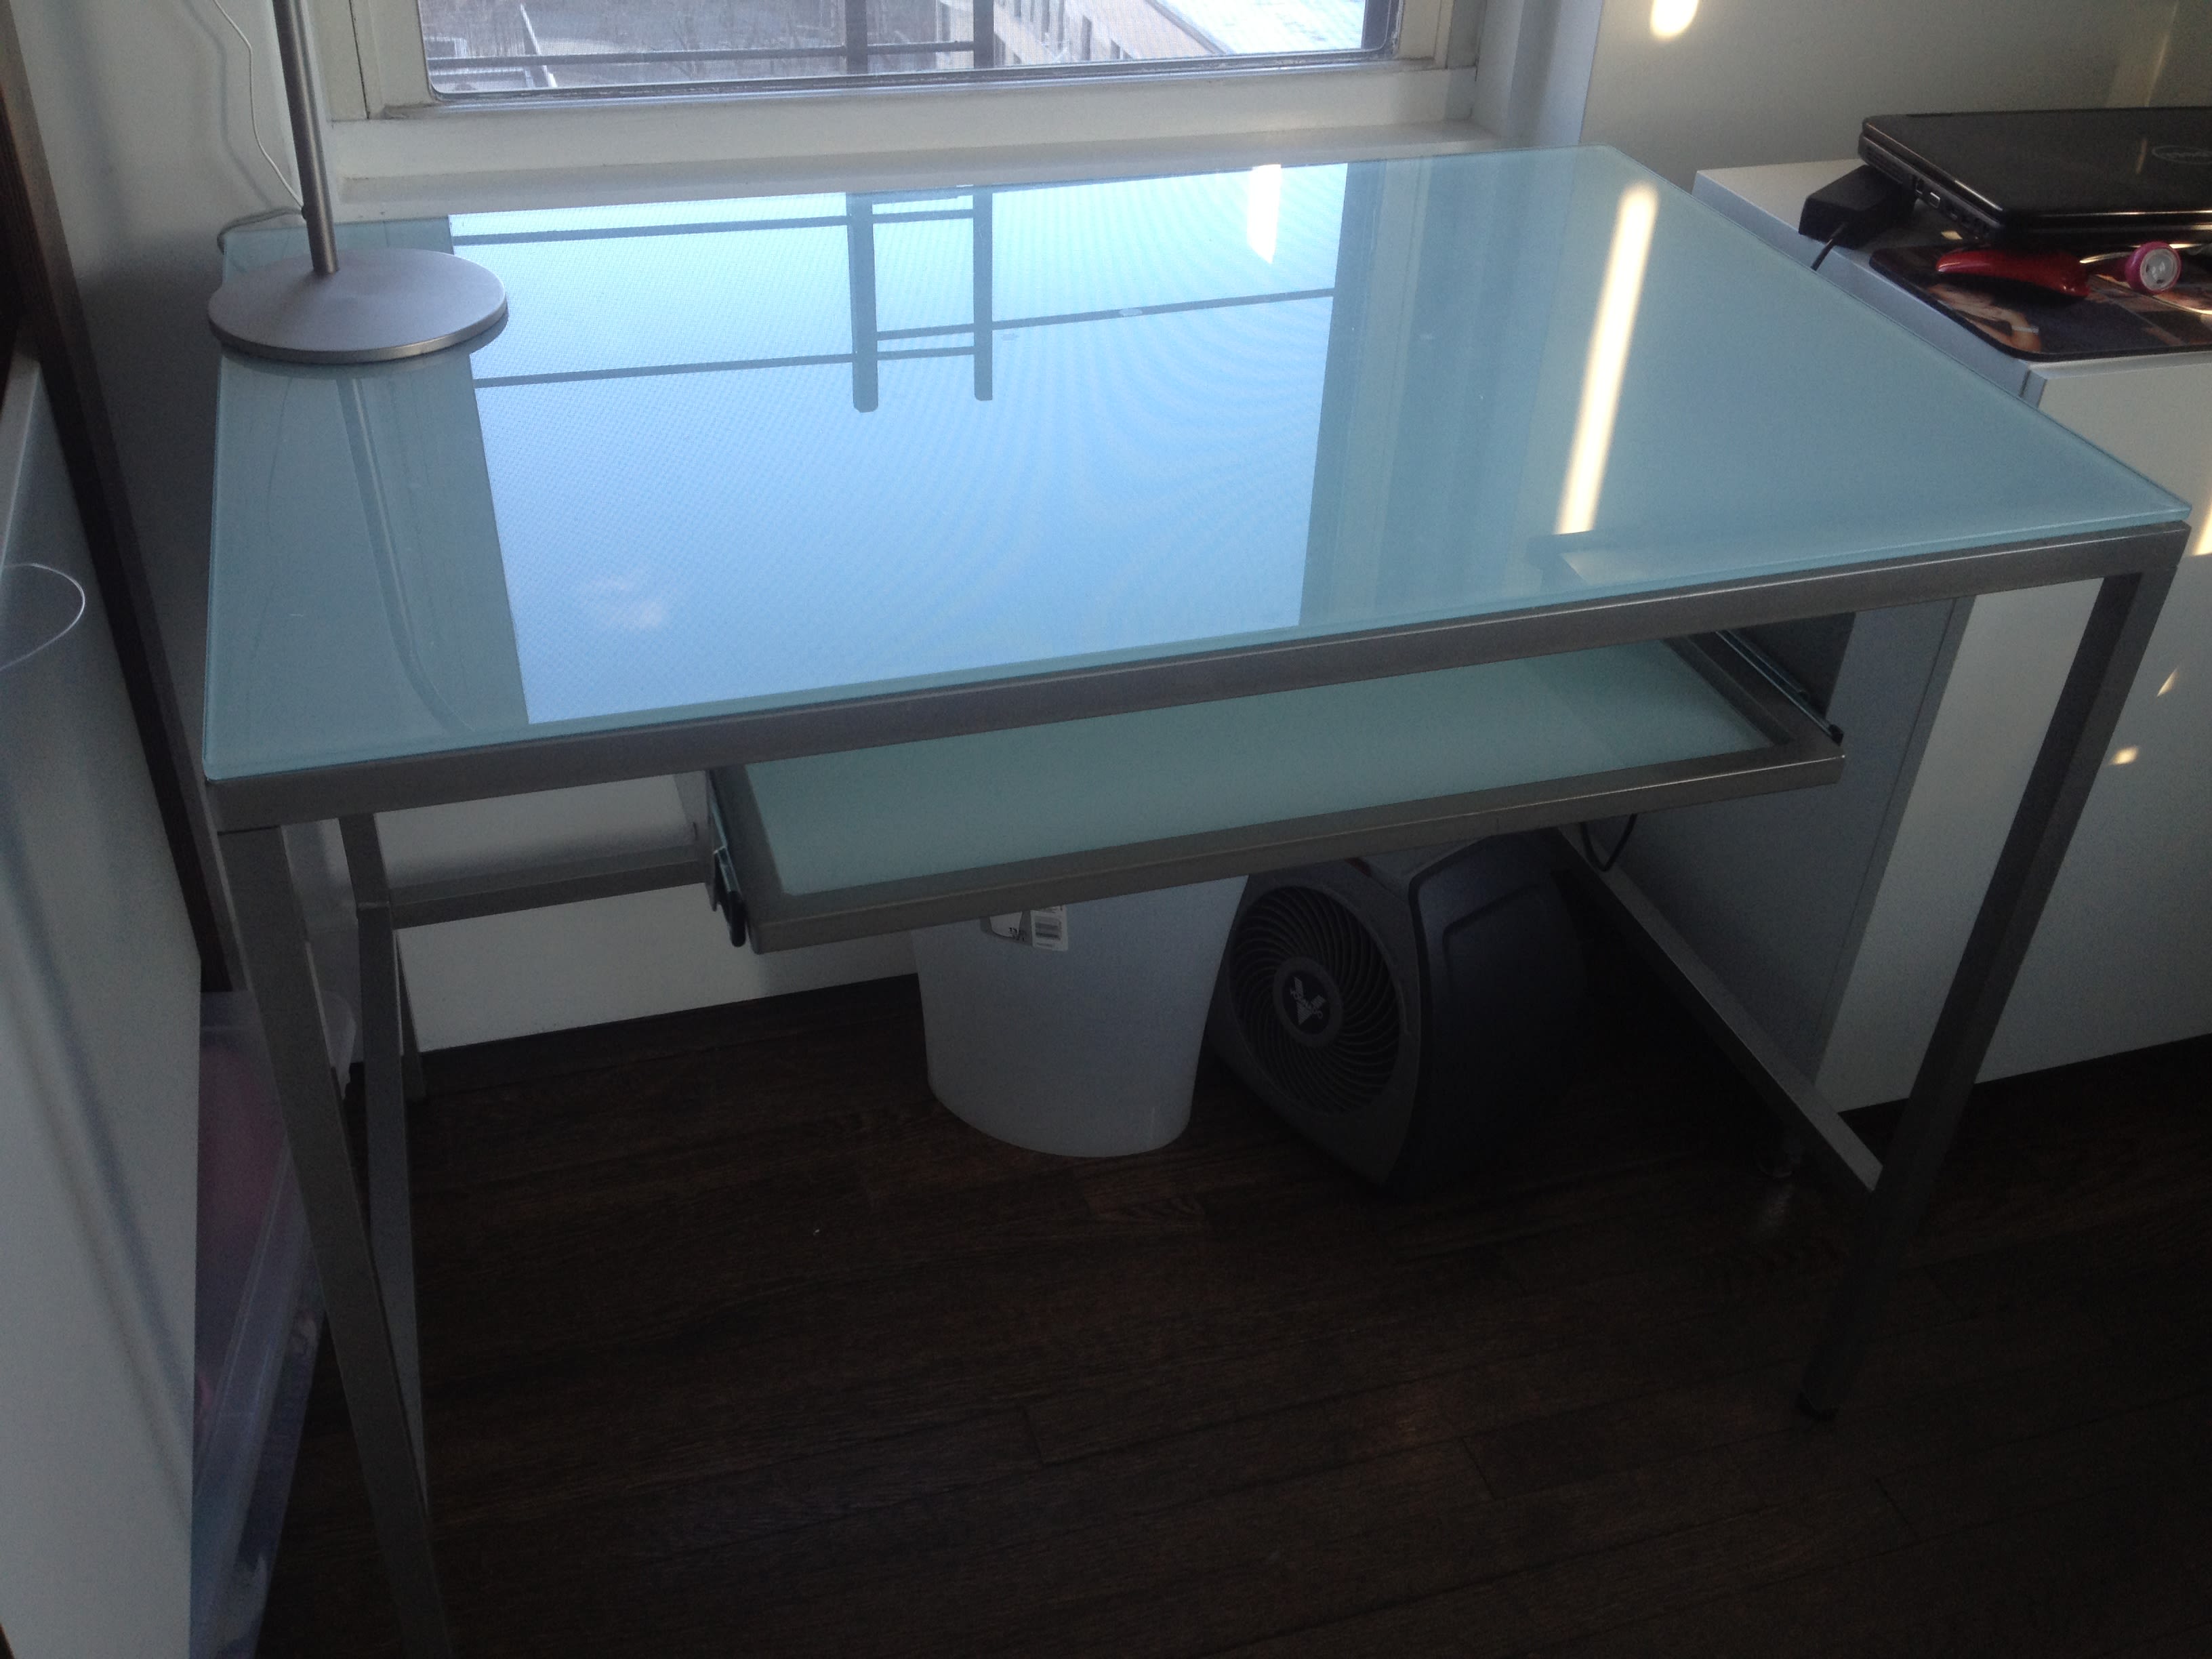 Cb2 Trig Glass And Steel Desk Apartment Therapy S Bazaar